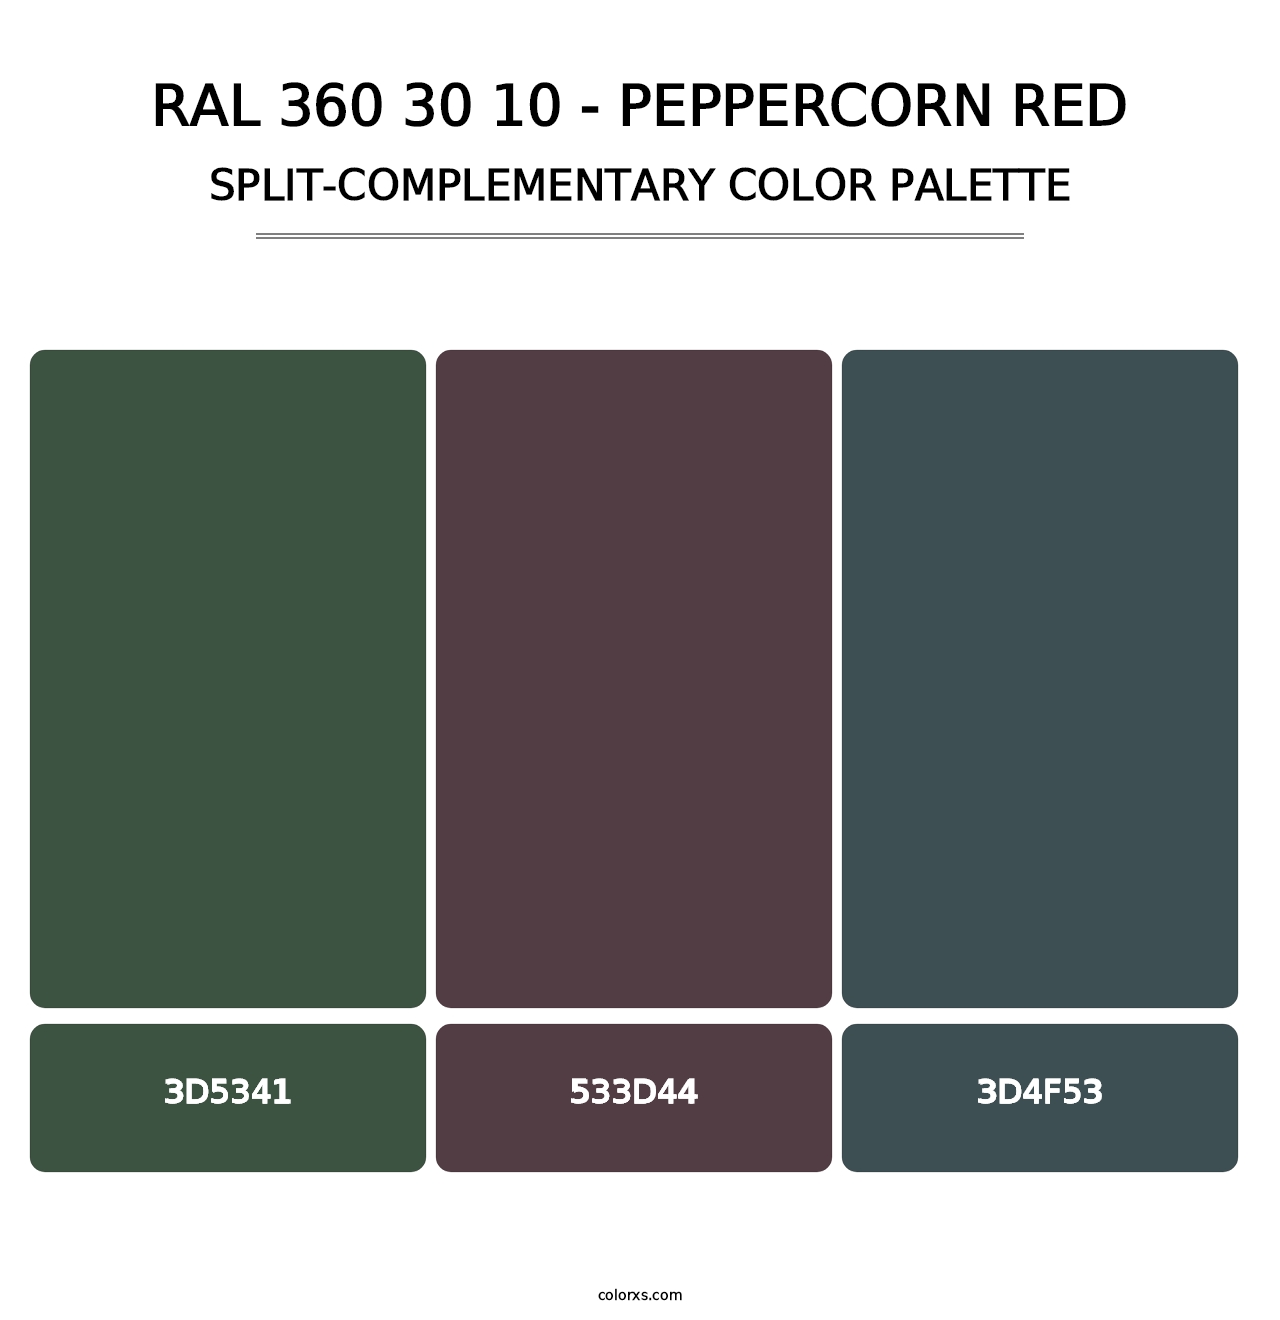 RAL 360 30 10 - Peppercorn Red - Split-Complementary Color Palette